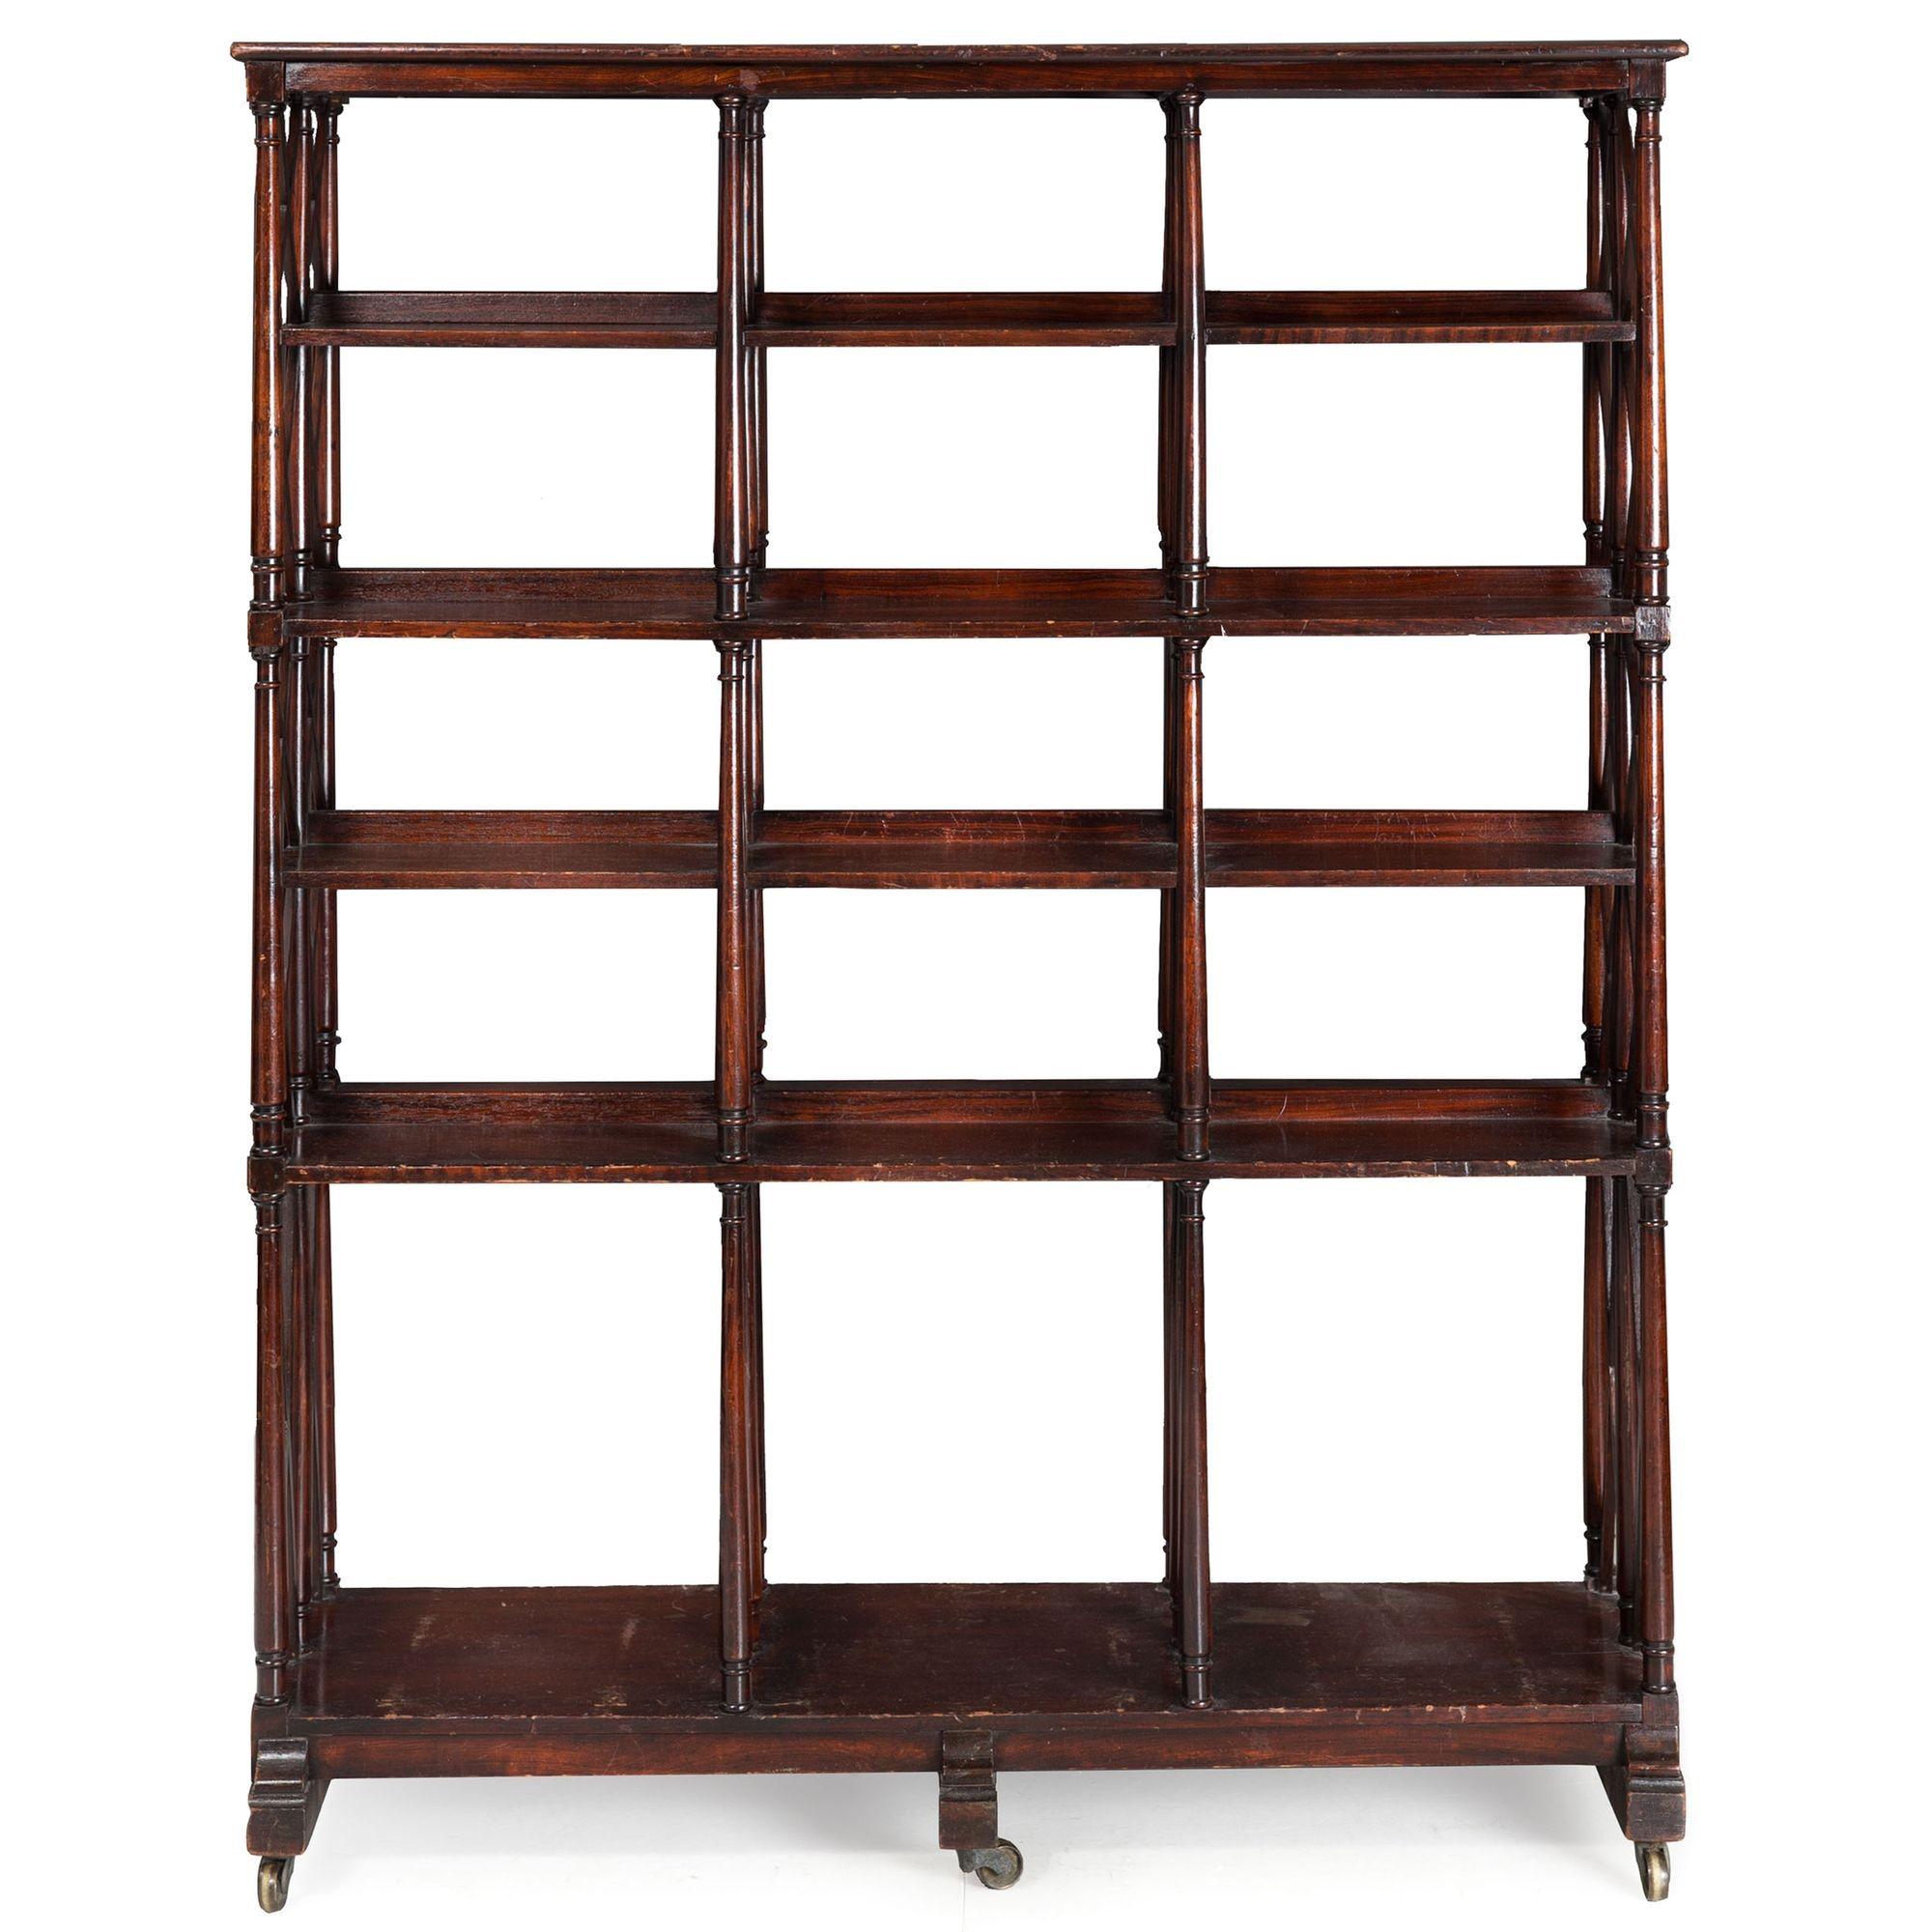 UNUSUAL VICTORIAN MAHOGANY DOUBLE-SIDED BOOKCASE
England, circa mid-to-late 19th century
Item # 209APB28Q 

This uncommon double-sided bookcase is composed of a complex array of latticework that lends the needed strength and angular support to the